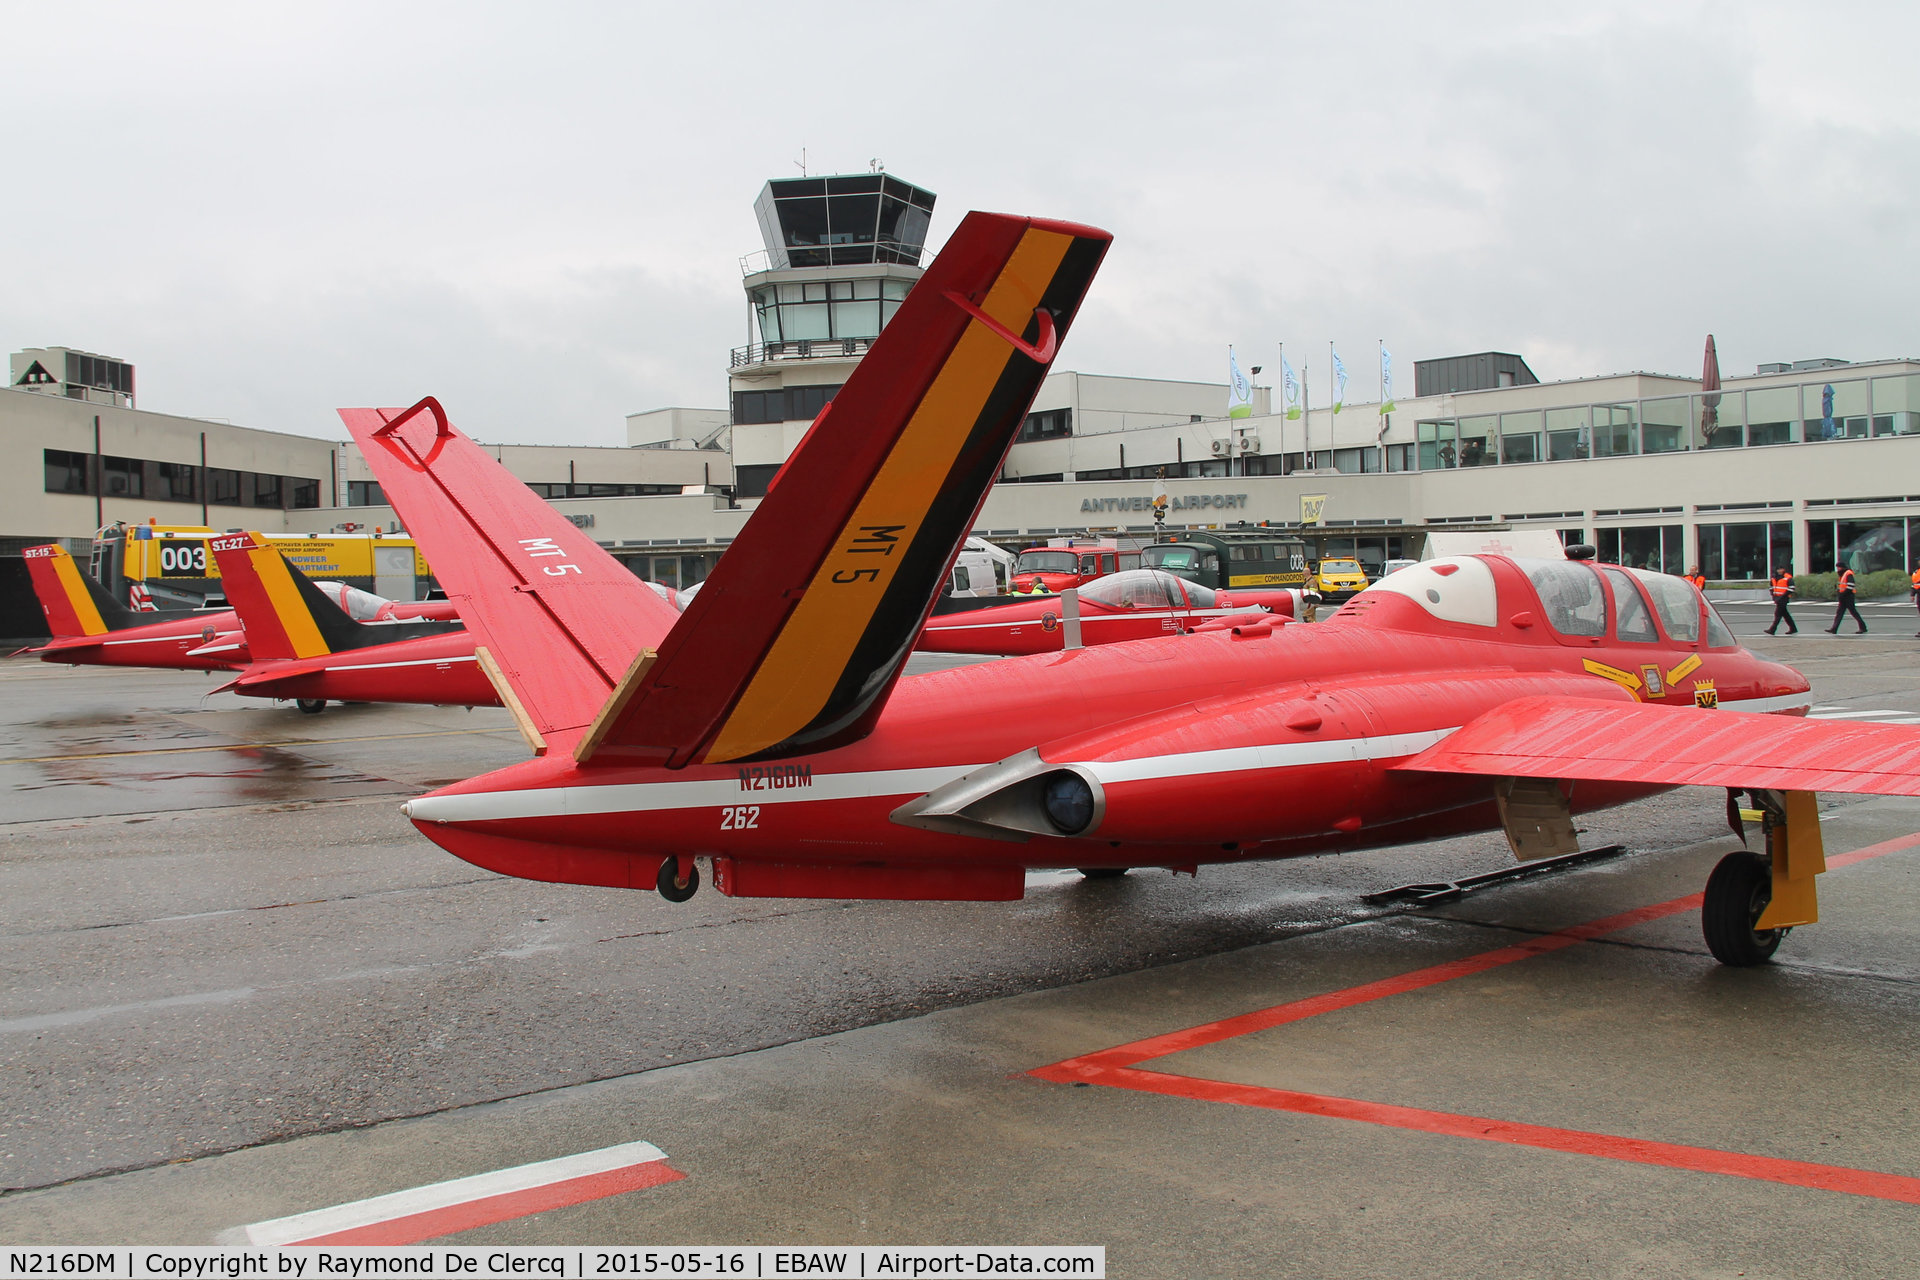 N216DM, 1960 Fouga CM-170 Magister C/N 262, Former Red Devils acrobatic team MT-5/ N216DM on display together
with the 4 Siai-Marchetti SF260M's of the current Red Devils team.